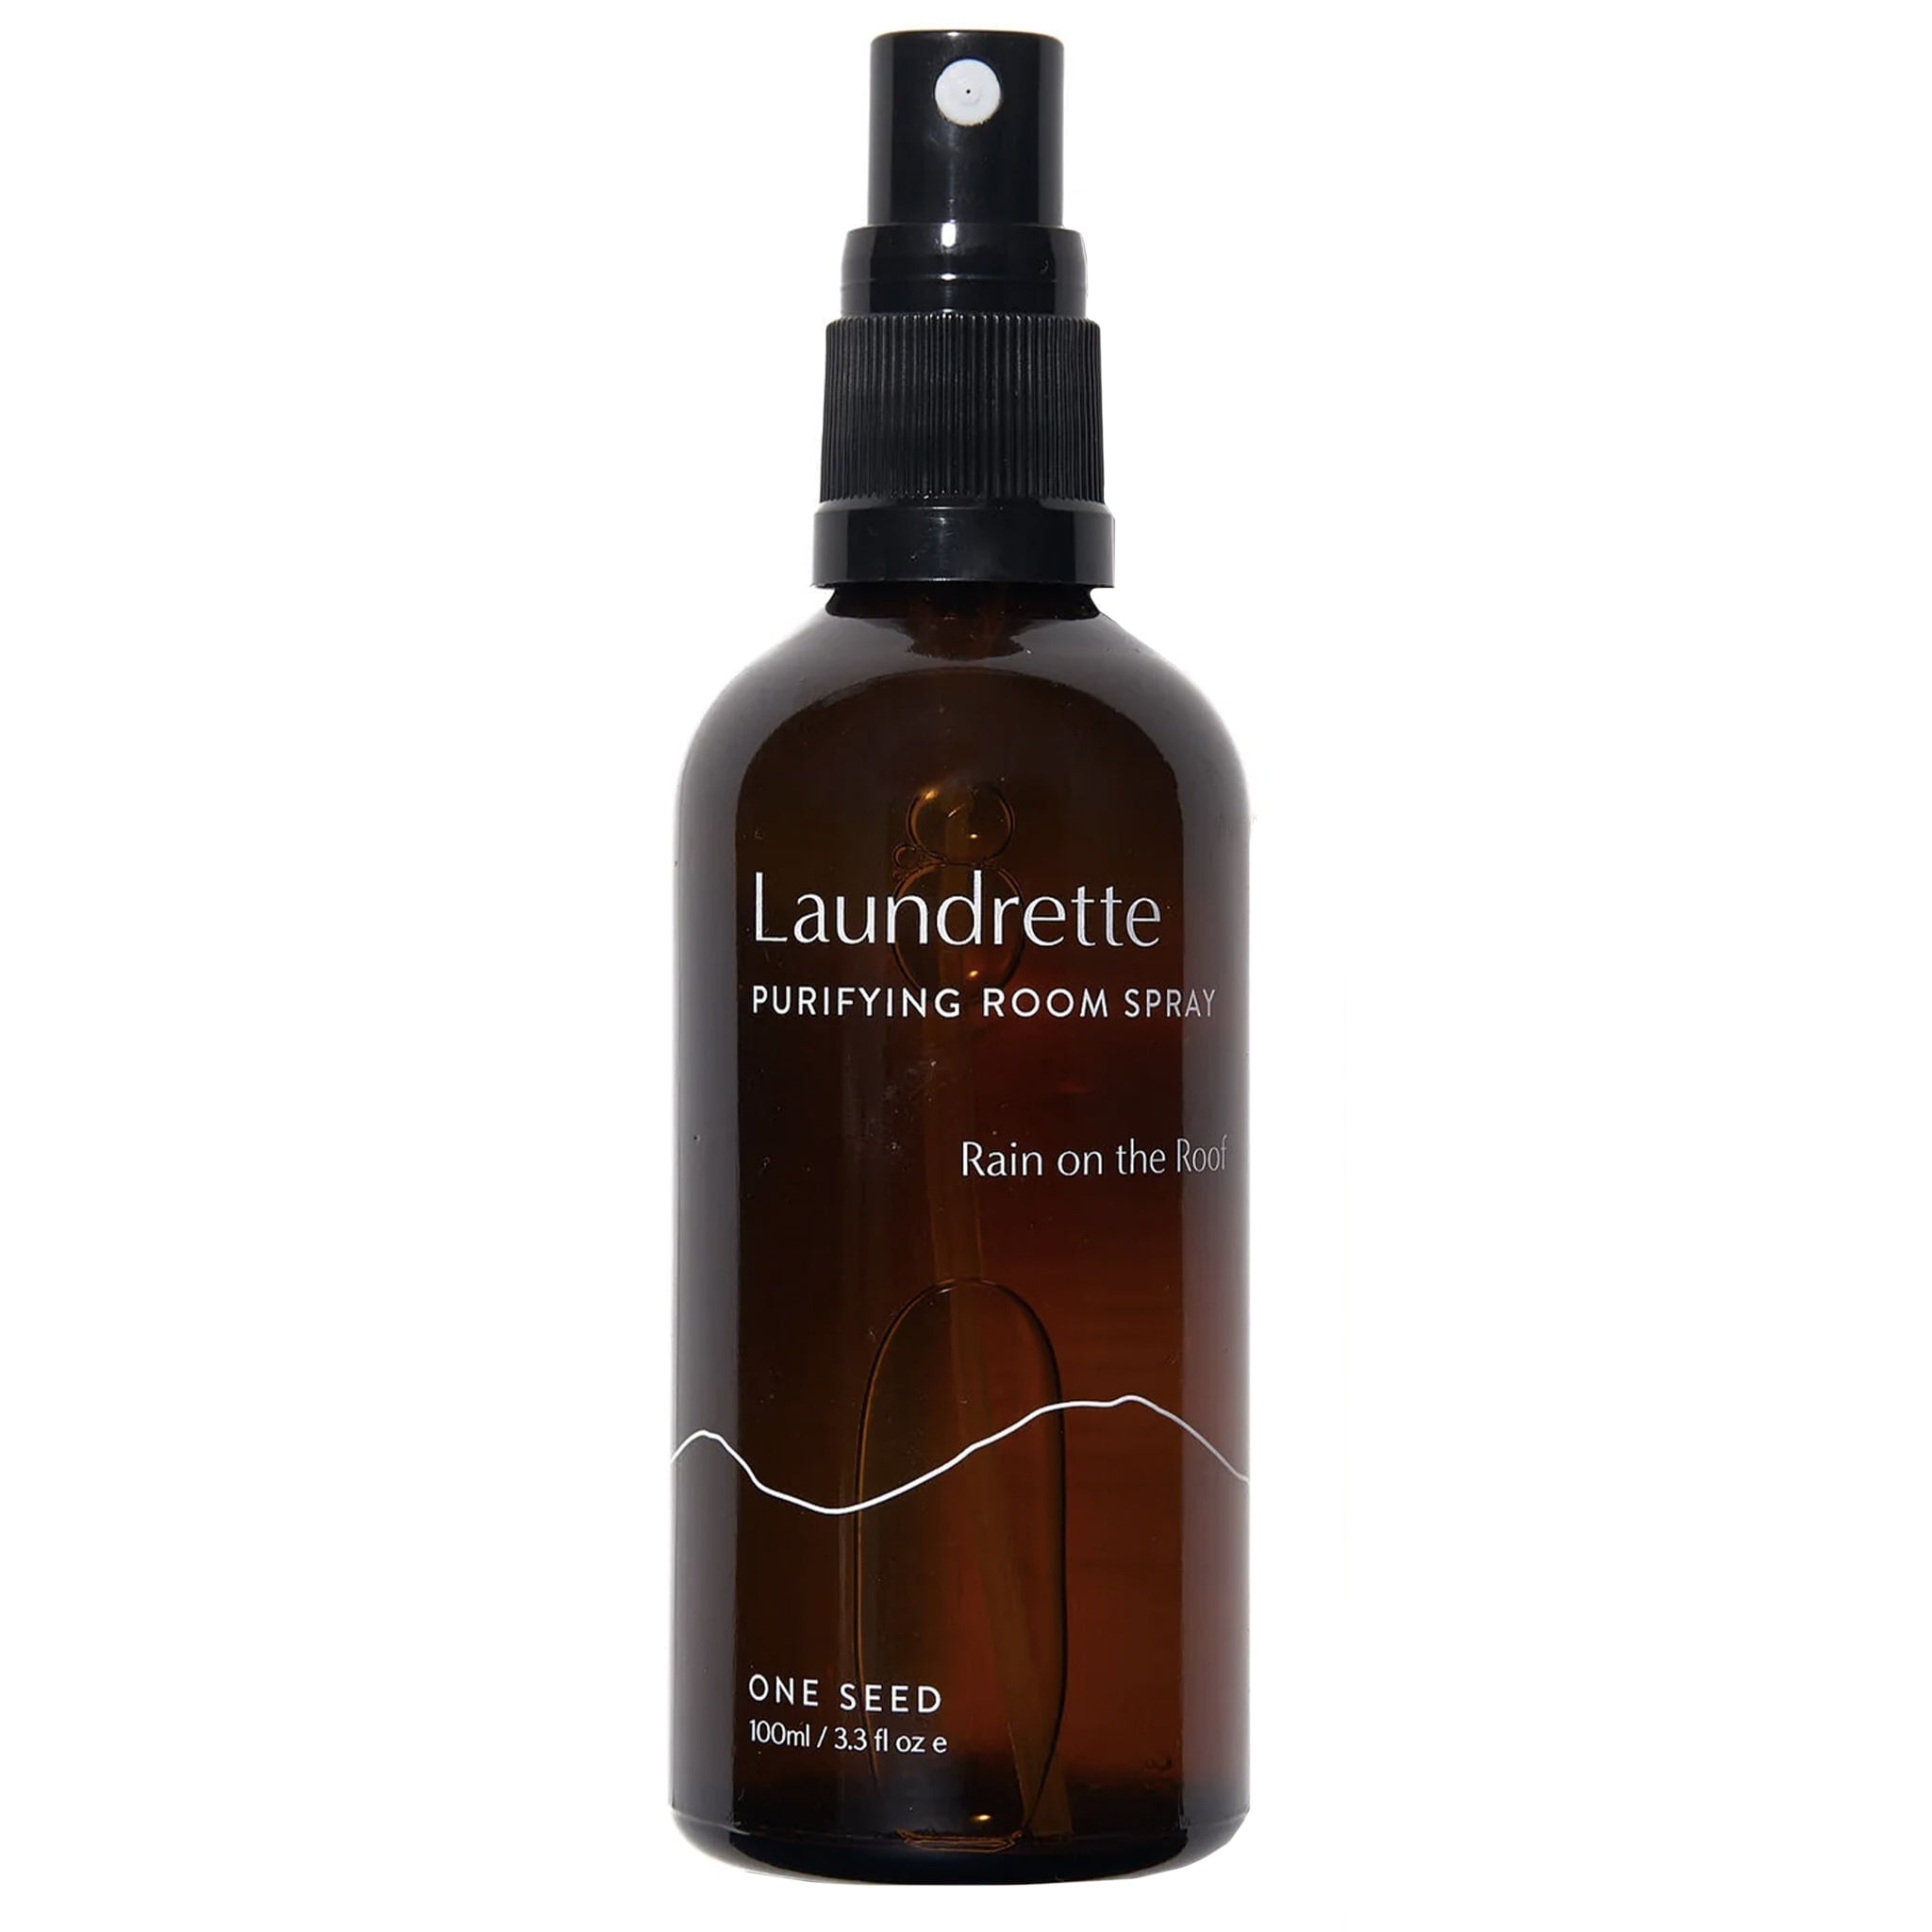 One Seed Laundrette Purifying Room Spray - Rain on the Roof - Tea Pea Home